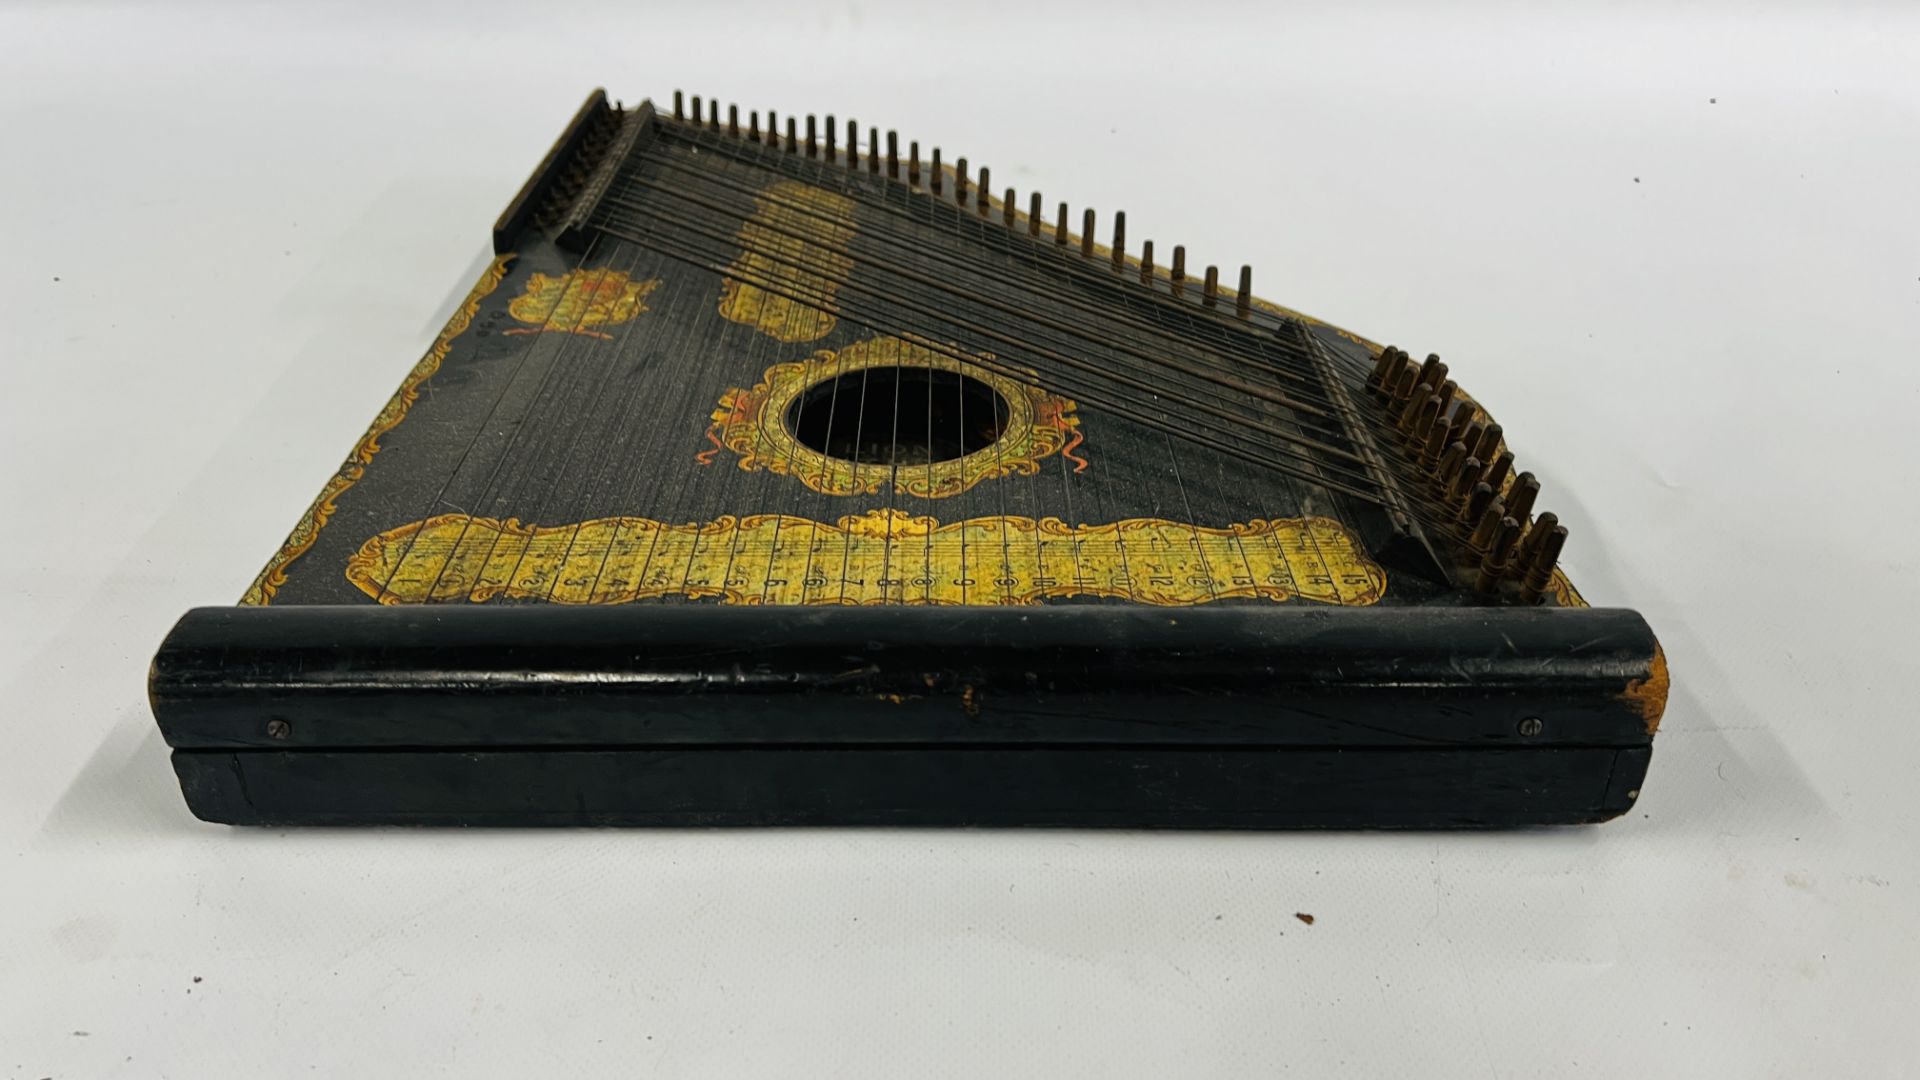 A VINTAGE "THE ANGLO AMERICAN LION ZITHER" MANUFACTURED BY THE ANGLO AMERICAN ZITHER Co NEW YORK - Image 5 of 13